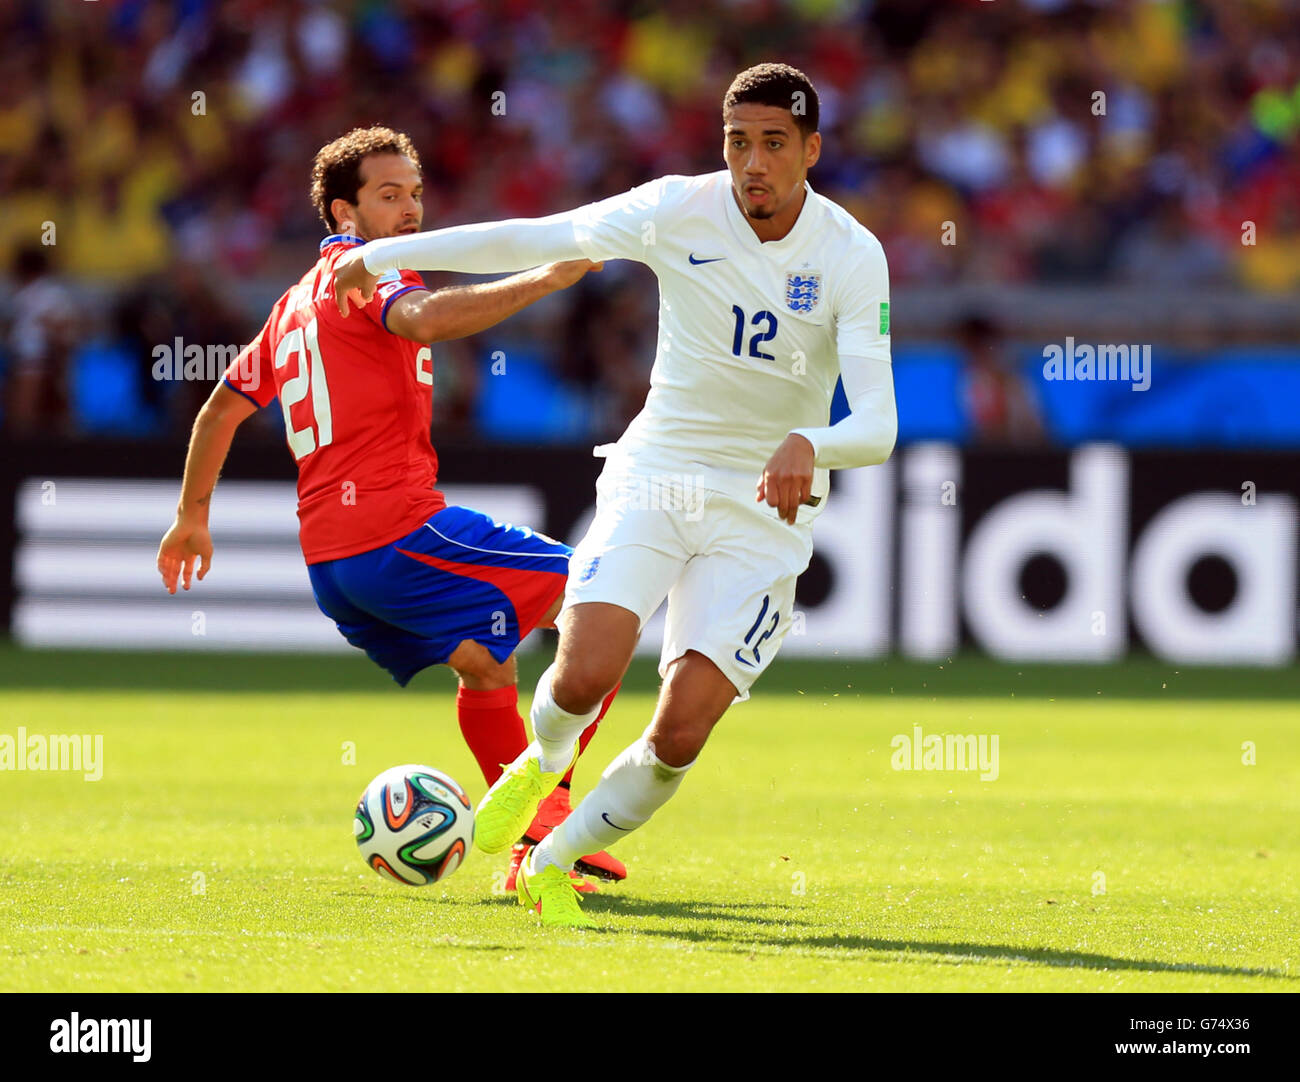 England's Chris Smalling in action during the FIFA World Cup, Group D match at the Estadio Mineirao, Belo Horizonte, Brazil. PRESS ASSOCIATION Photo. Picture date: TuesdayJune 24, 2014. See PA Story SOCCER Costa Rica. Photo credit should read: Mike Egerton/PA Wire. RESTRICTIONS: No commercial use. No use with any unofficial 3rd party logos. No manipulation of images. No video emulation Stock Photo